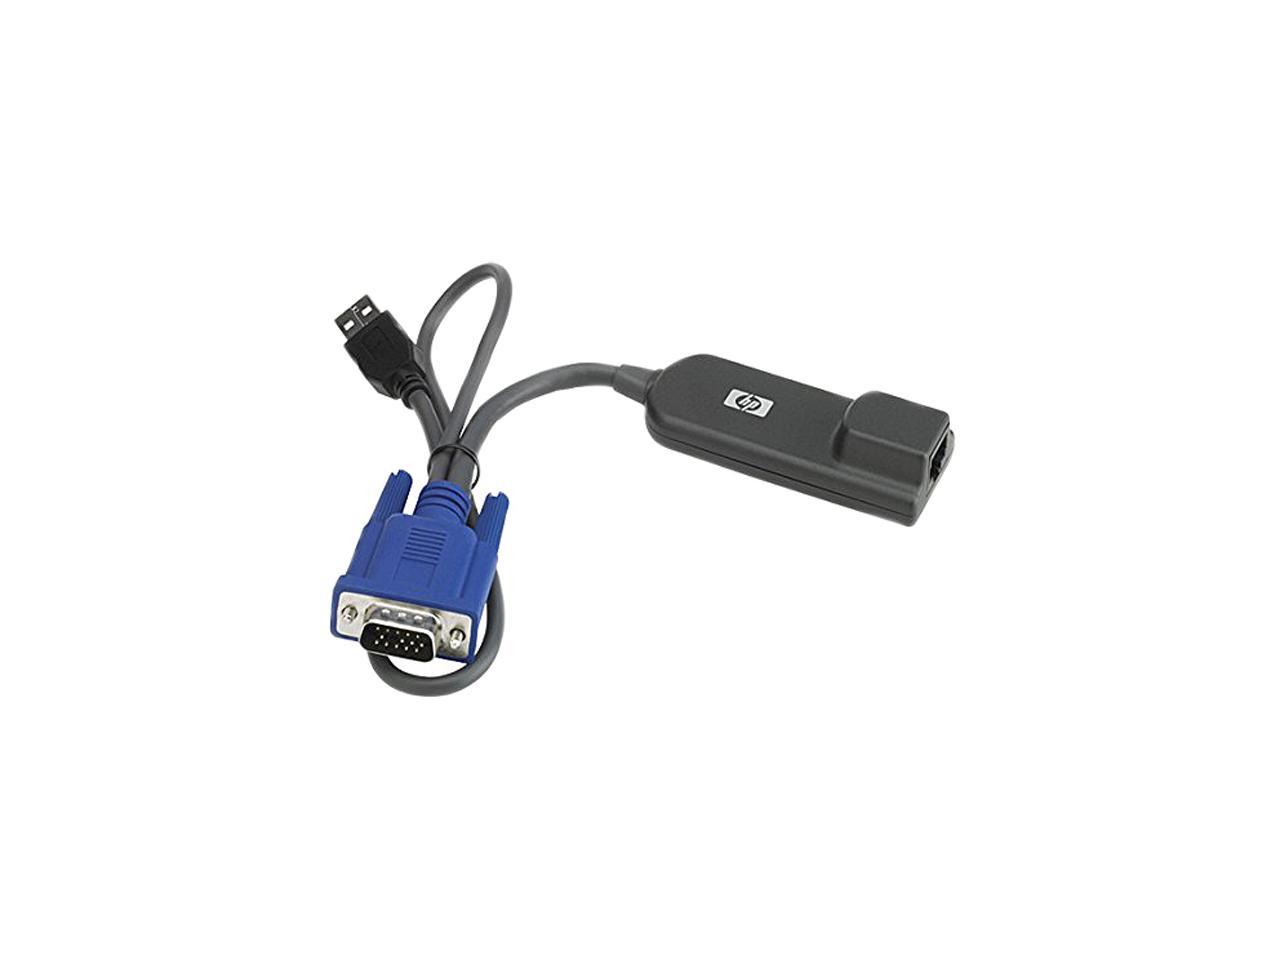 HP AF628A KVM Console USB Interface Adapter - 1 Pack - USB - Keyboard/Mouse, Video